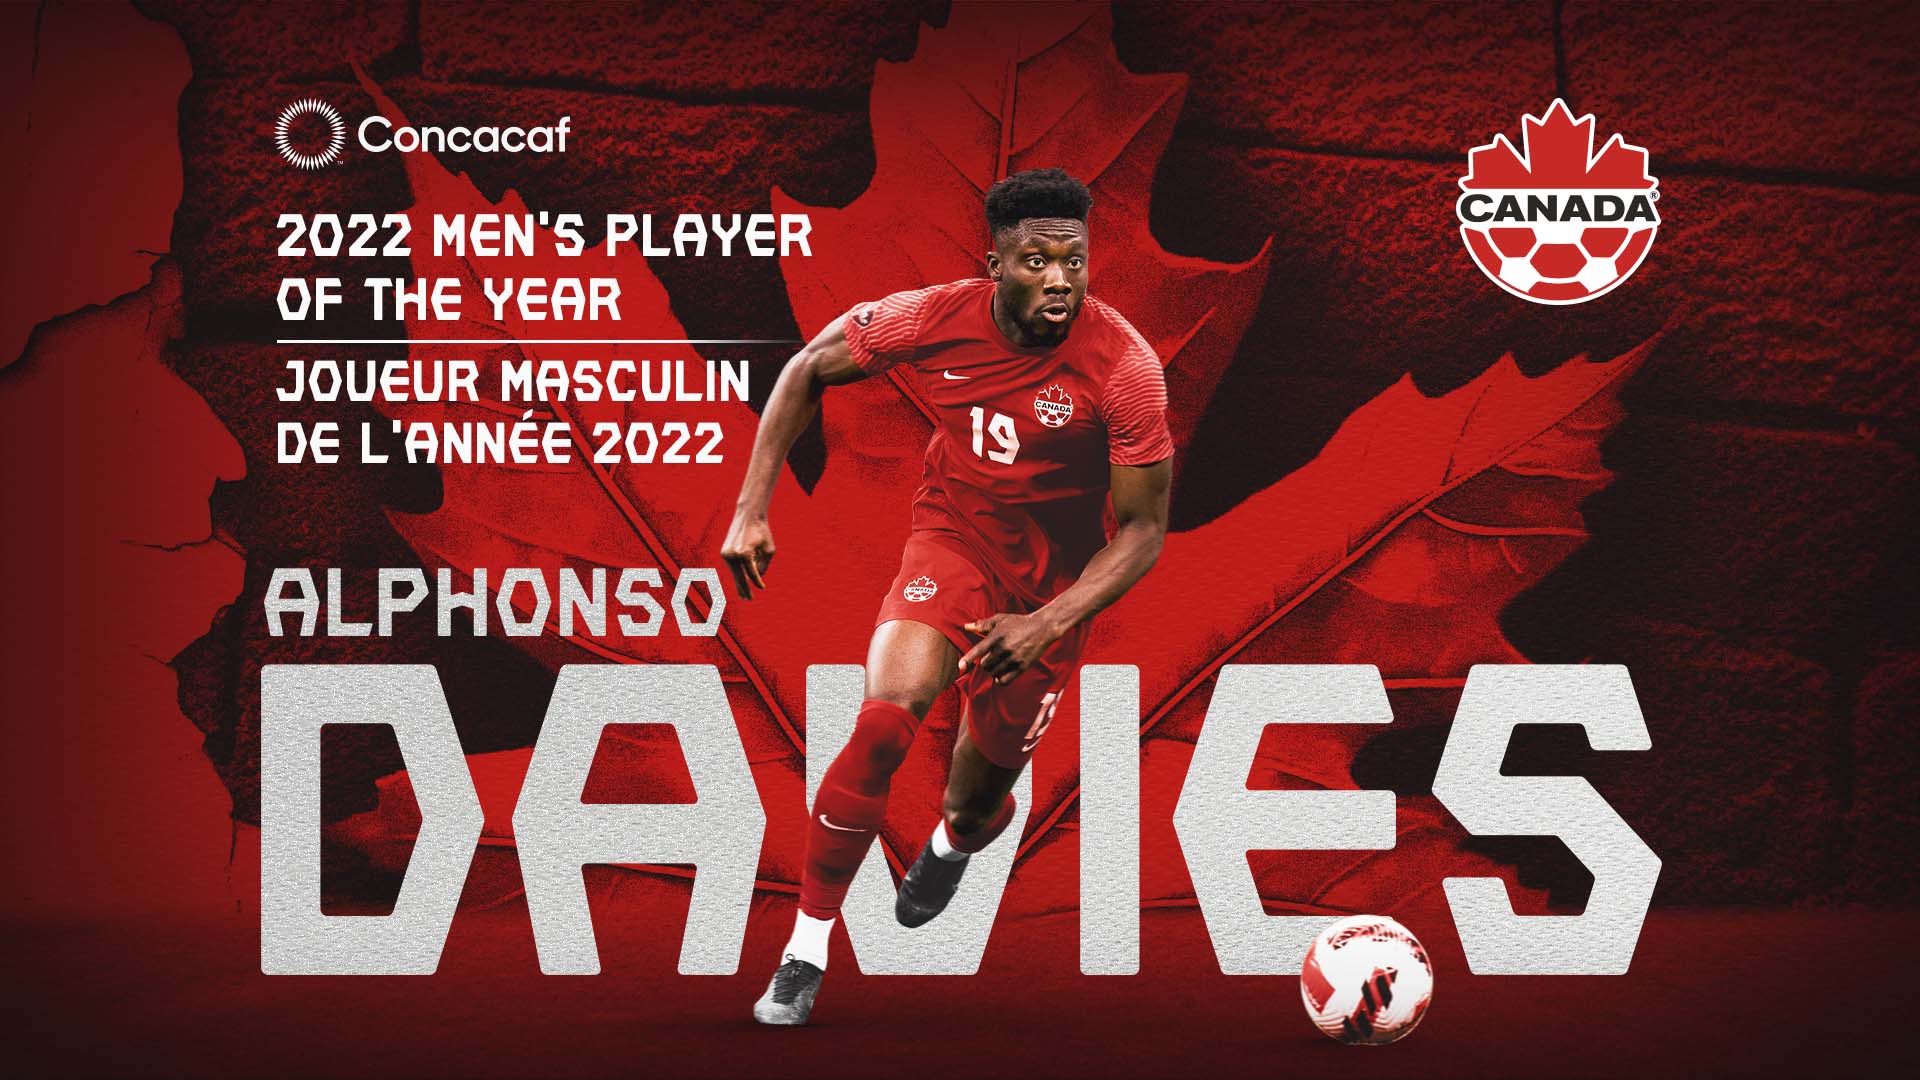 Alphonso Davies wins Concacaf Men’s Player of the Year Award